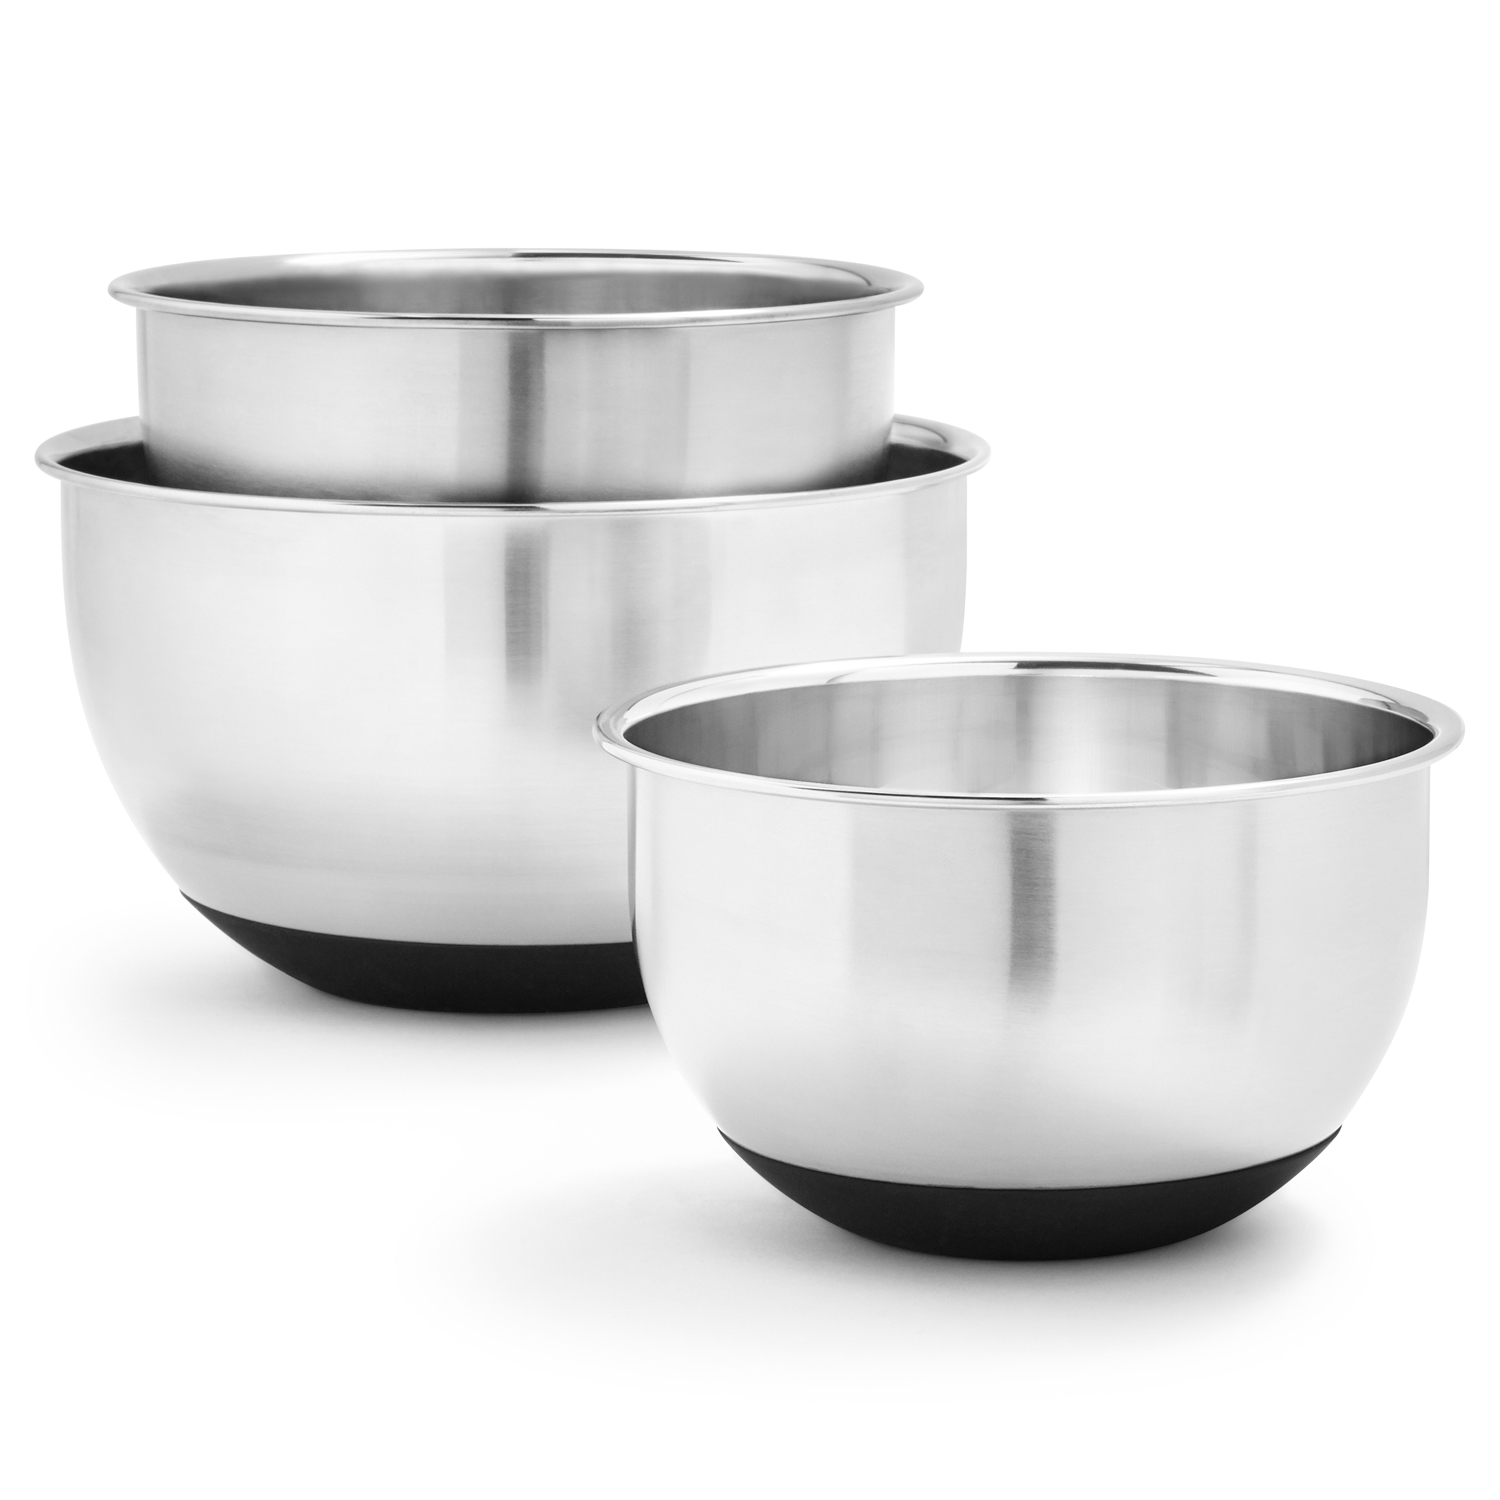 Polished Mirror Finish Nesting Bowls Stainless Steel Mixing Bowls Set of 6 